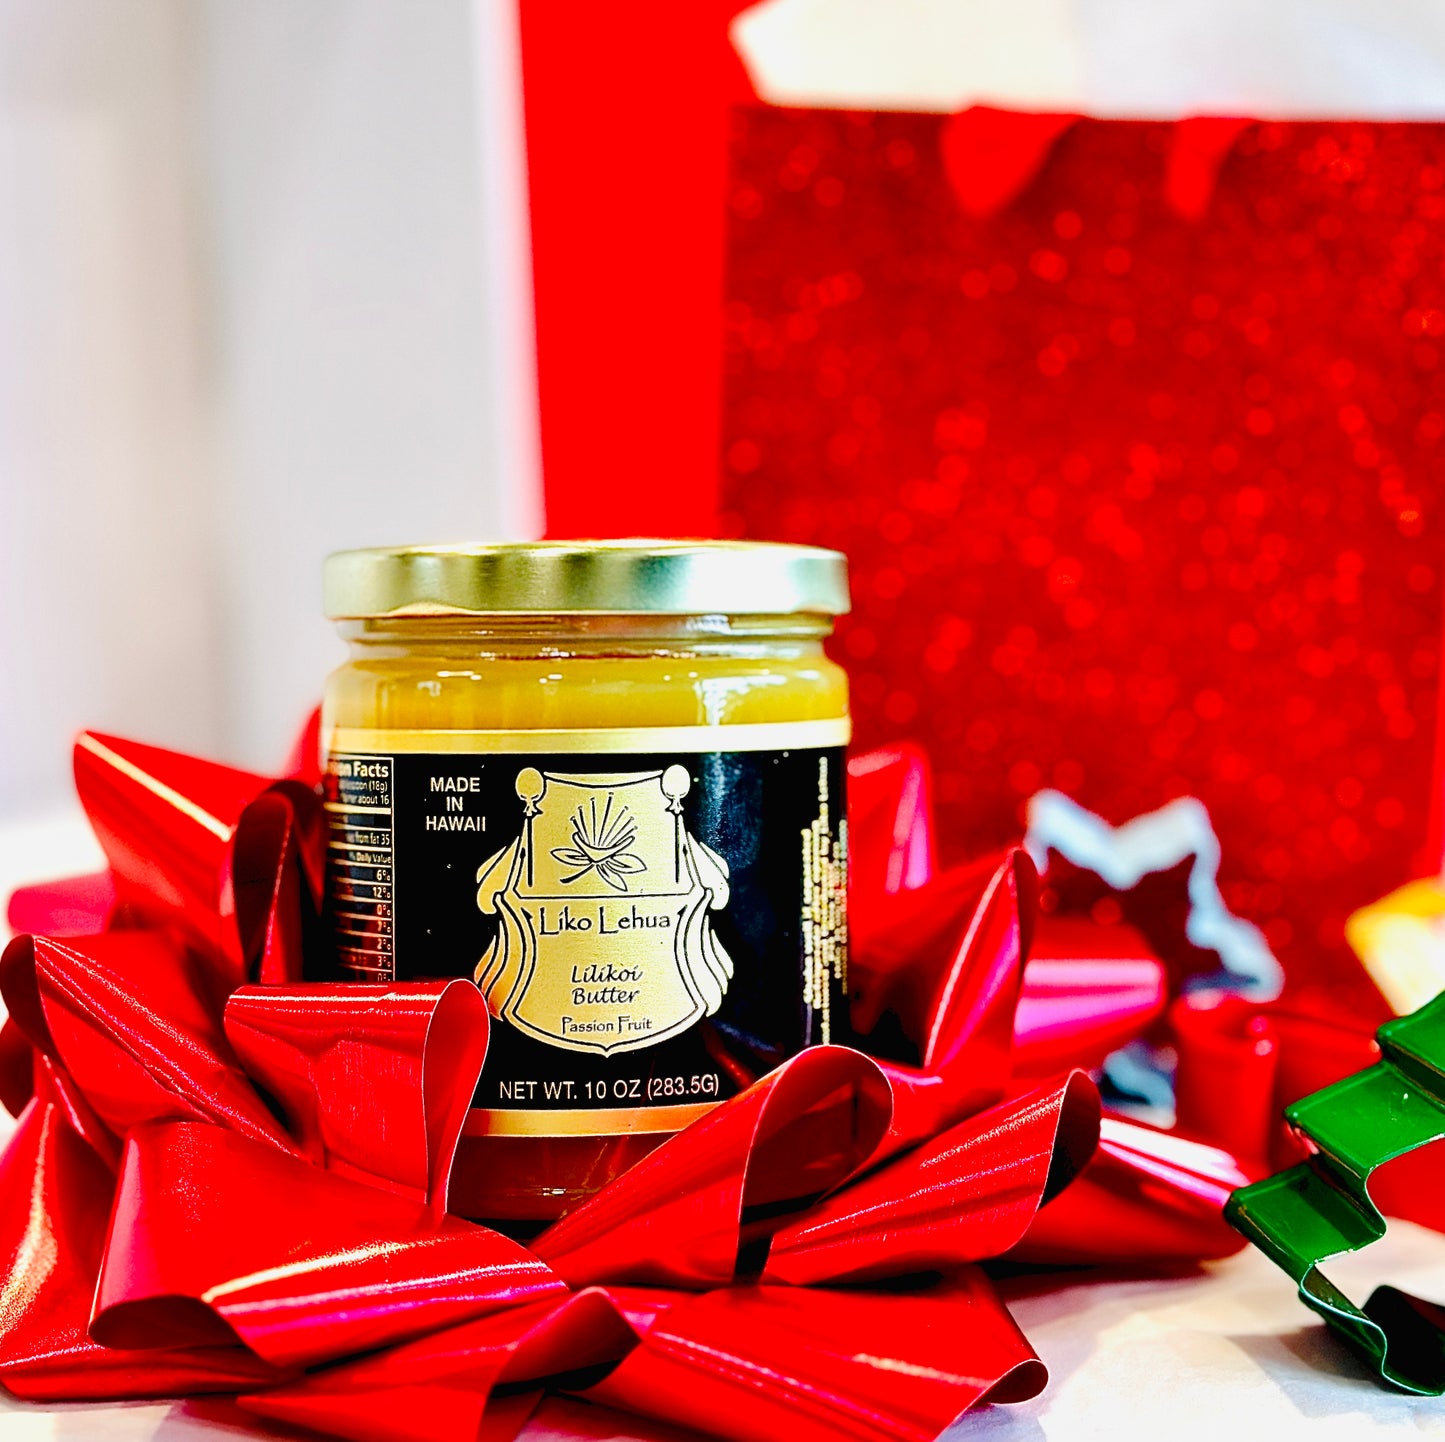 LIKO LEHUA HOLIDAY SPECIAL ~ BUY FIVE & GET ONE FREE